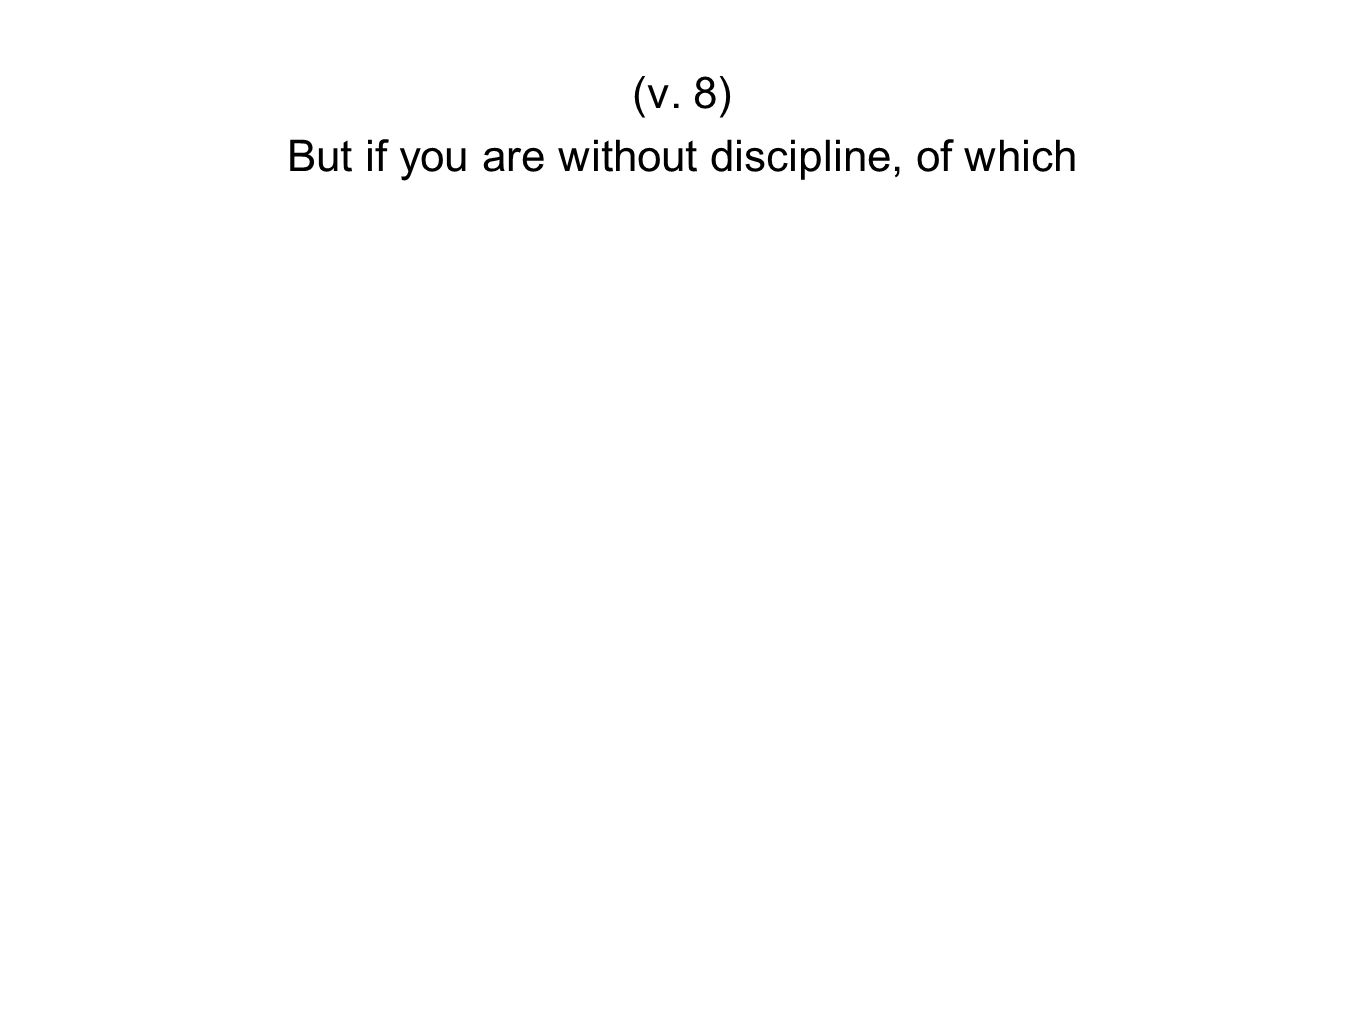 But if you are without discipline, of which